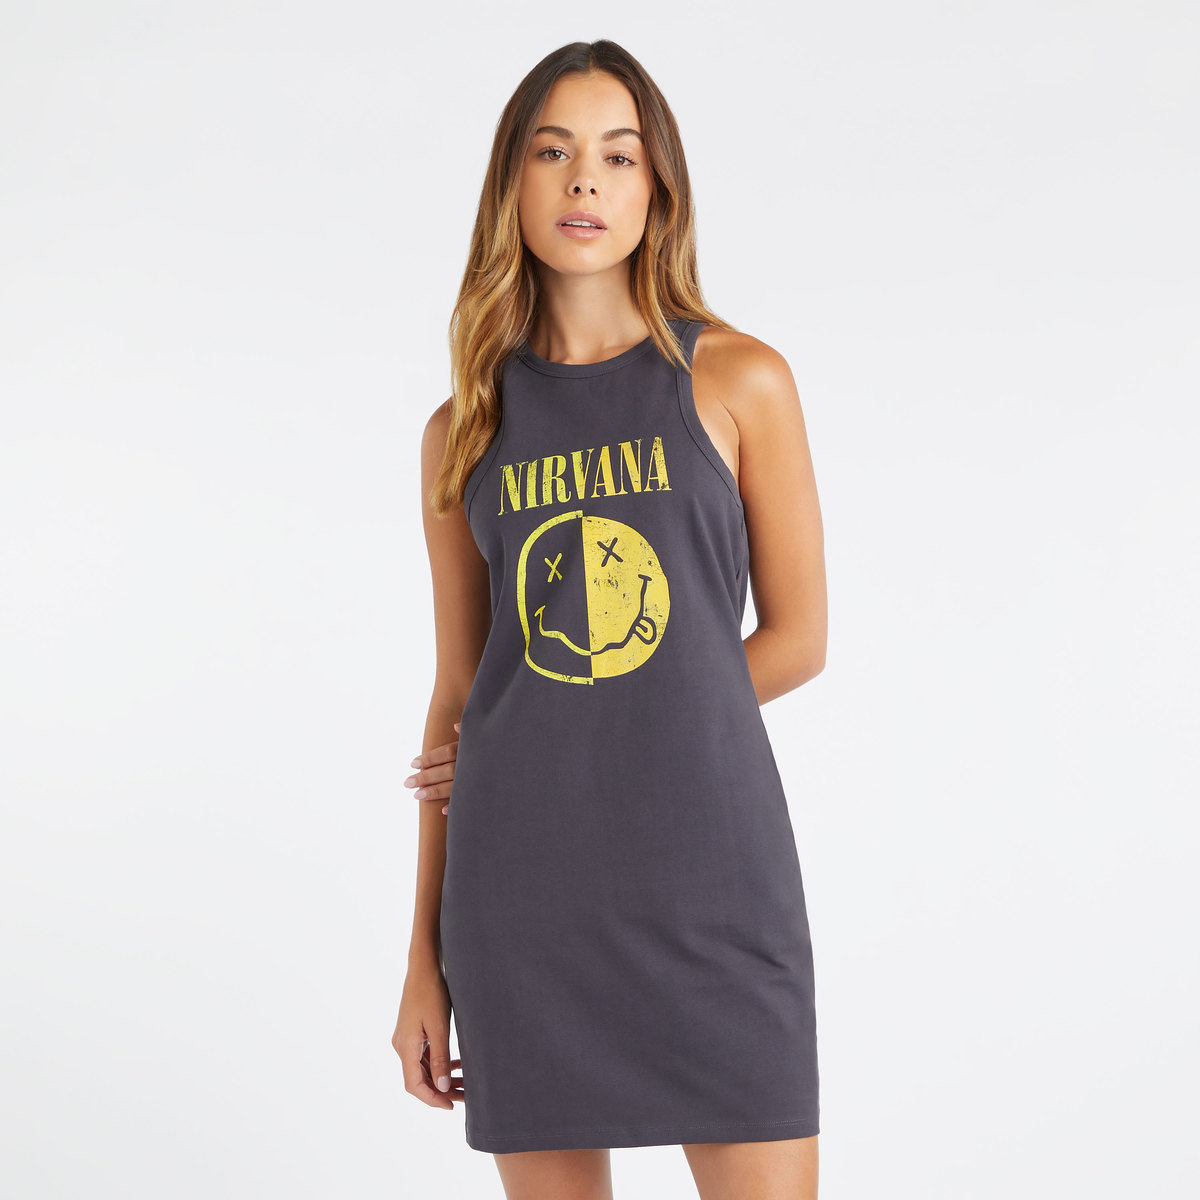 Nirvana - Spliced Smiley Fitted Dress